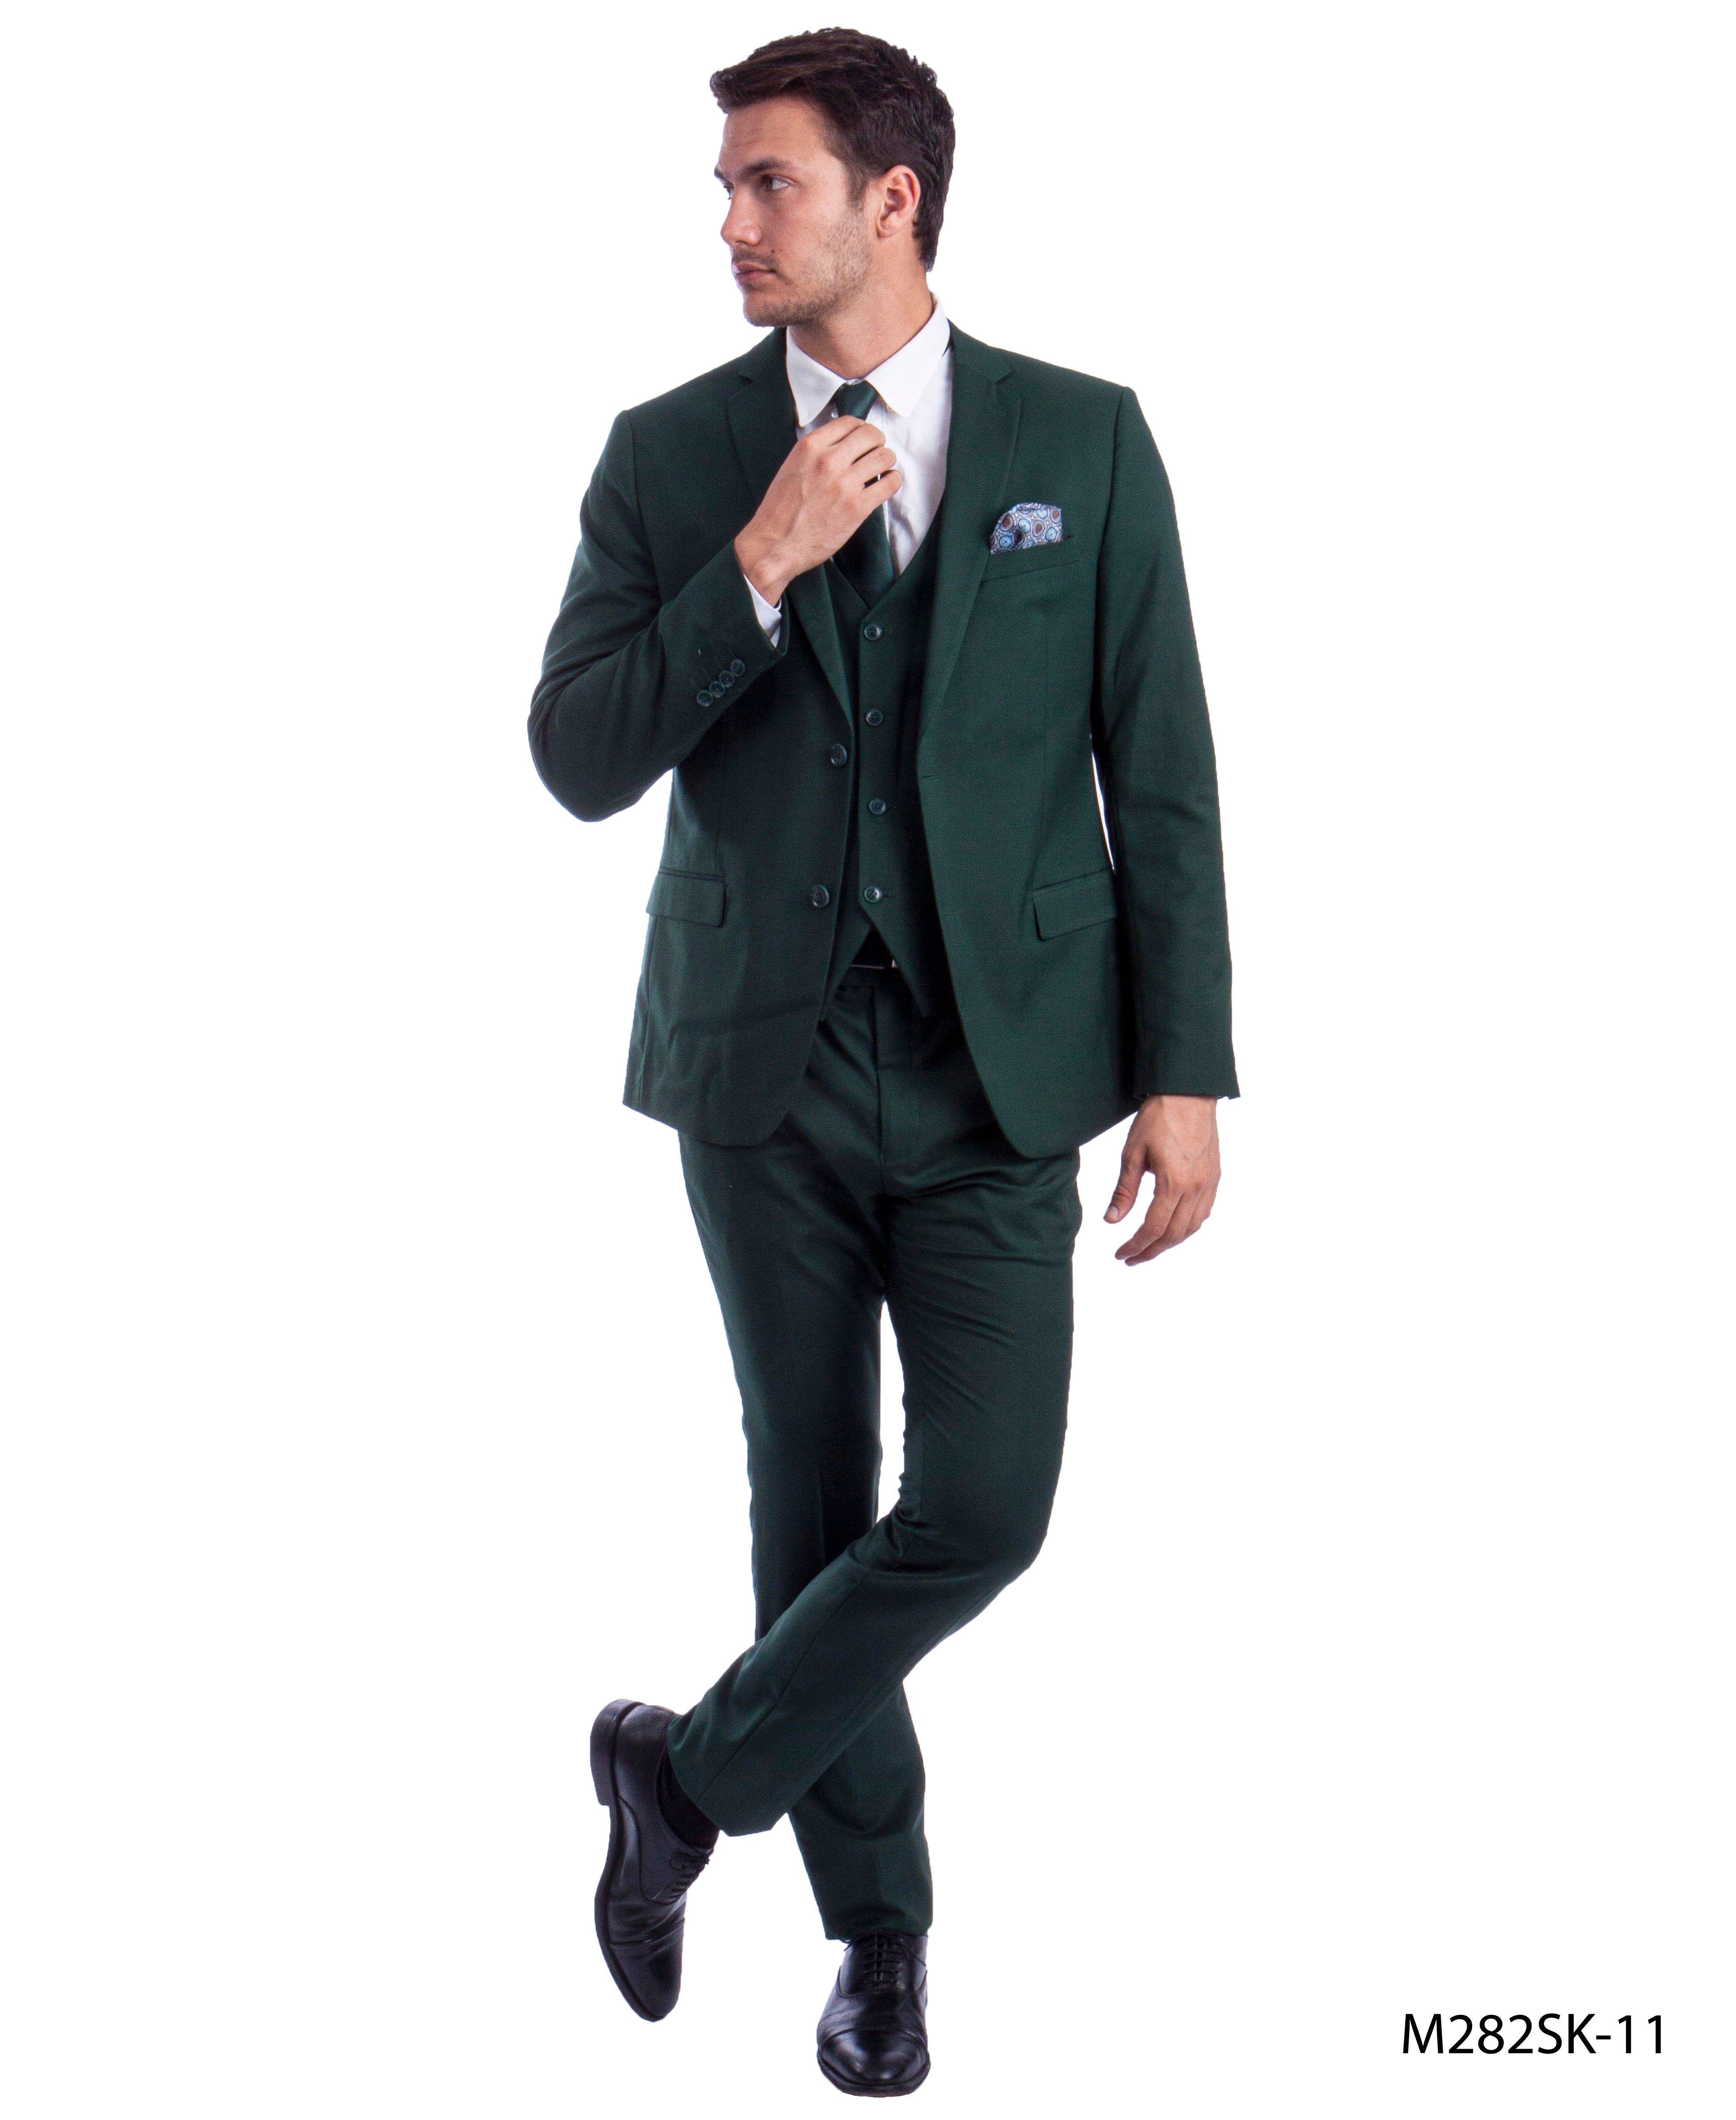 title:Sean Alexander Green 3 PC Solid Suit Skinny Fit Suits;color:Green